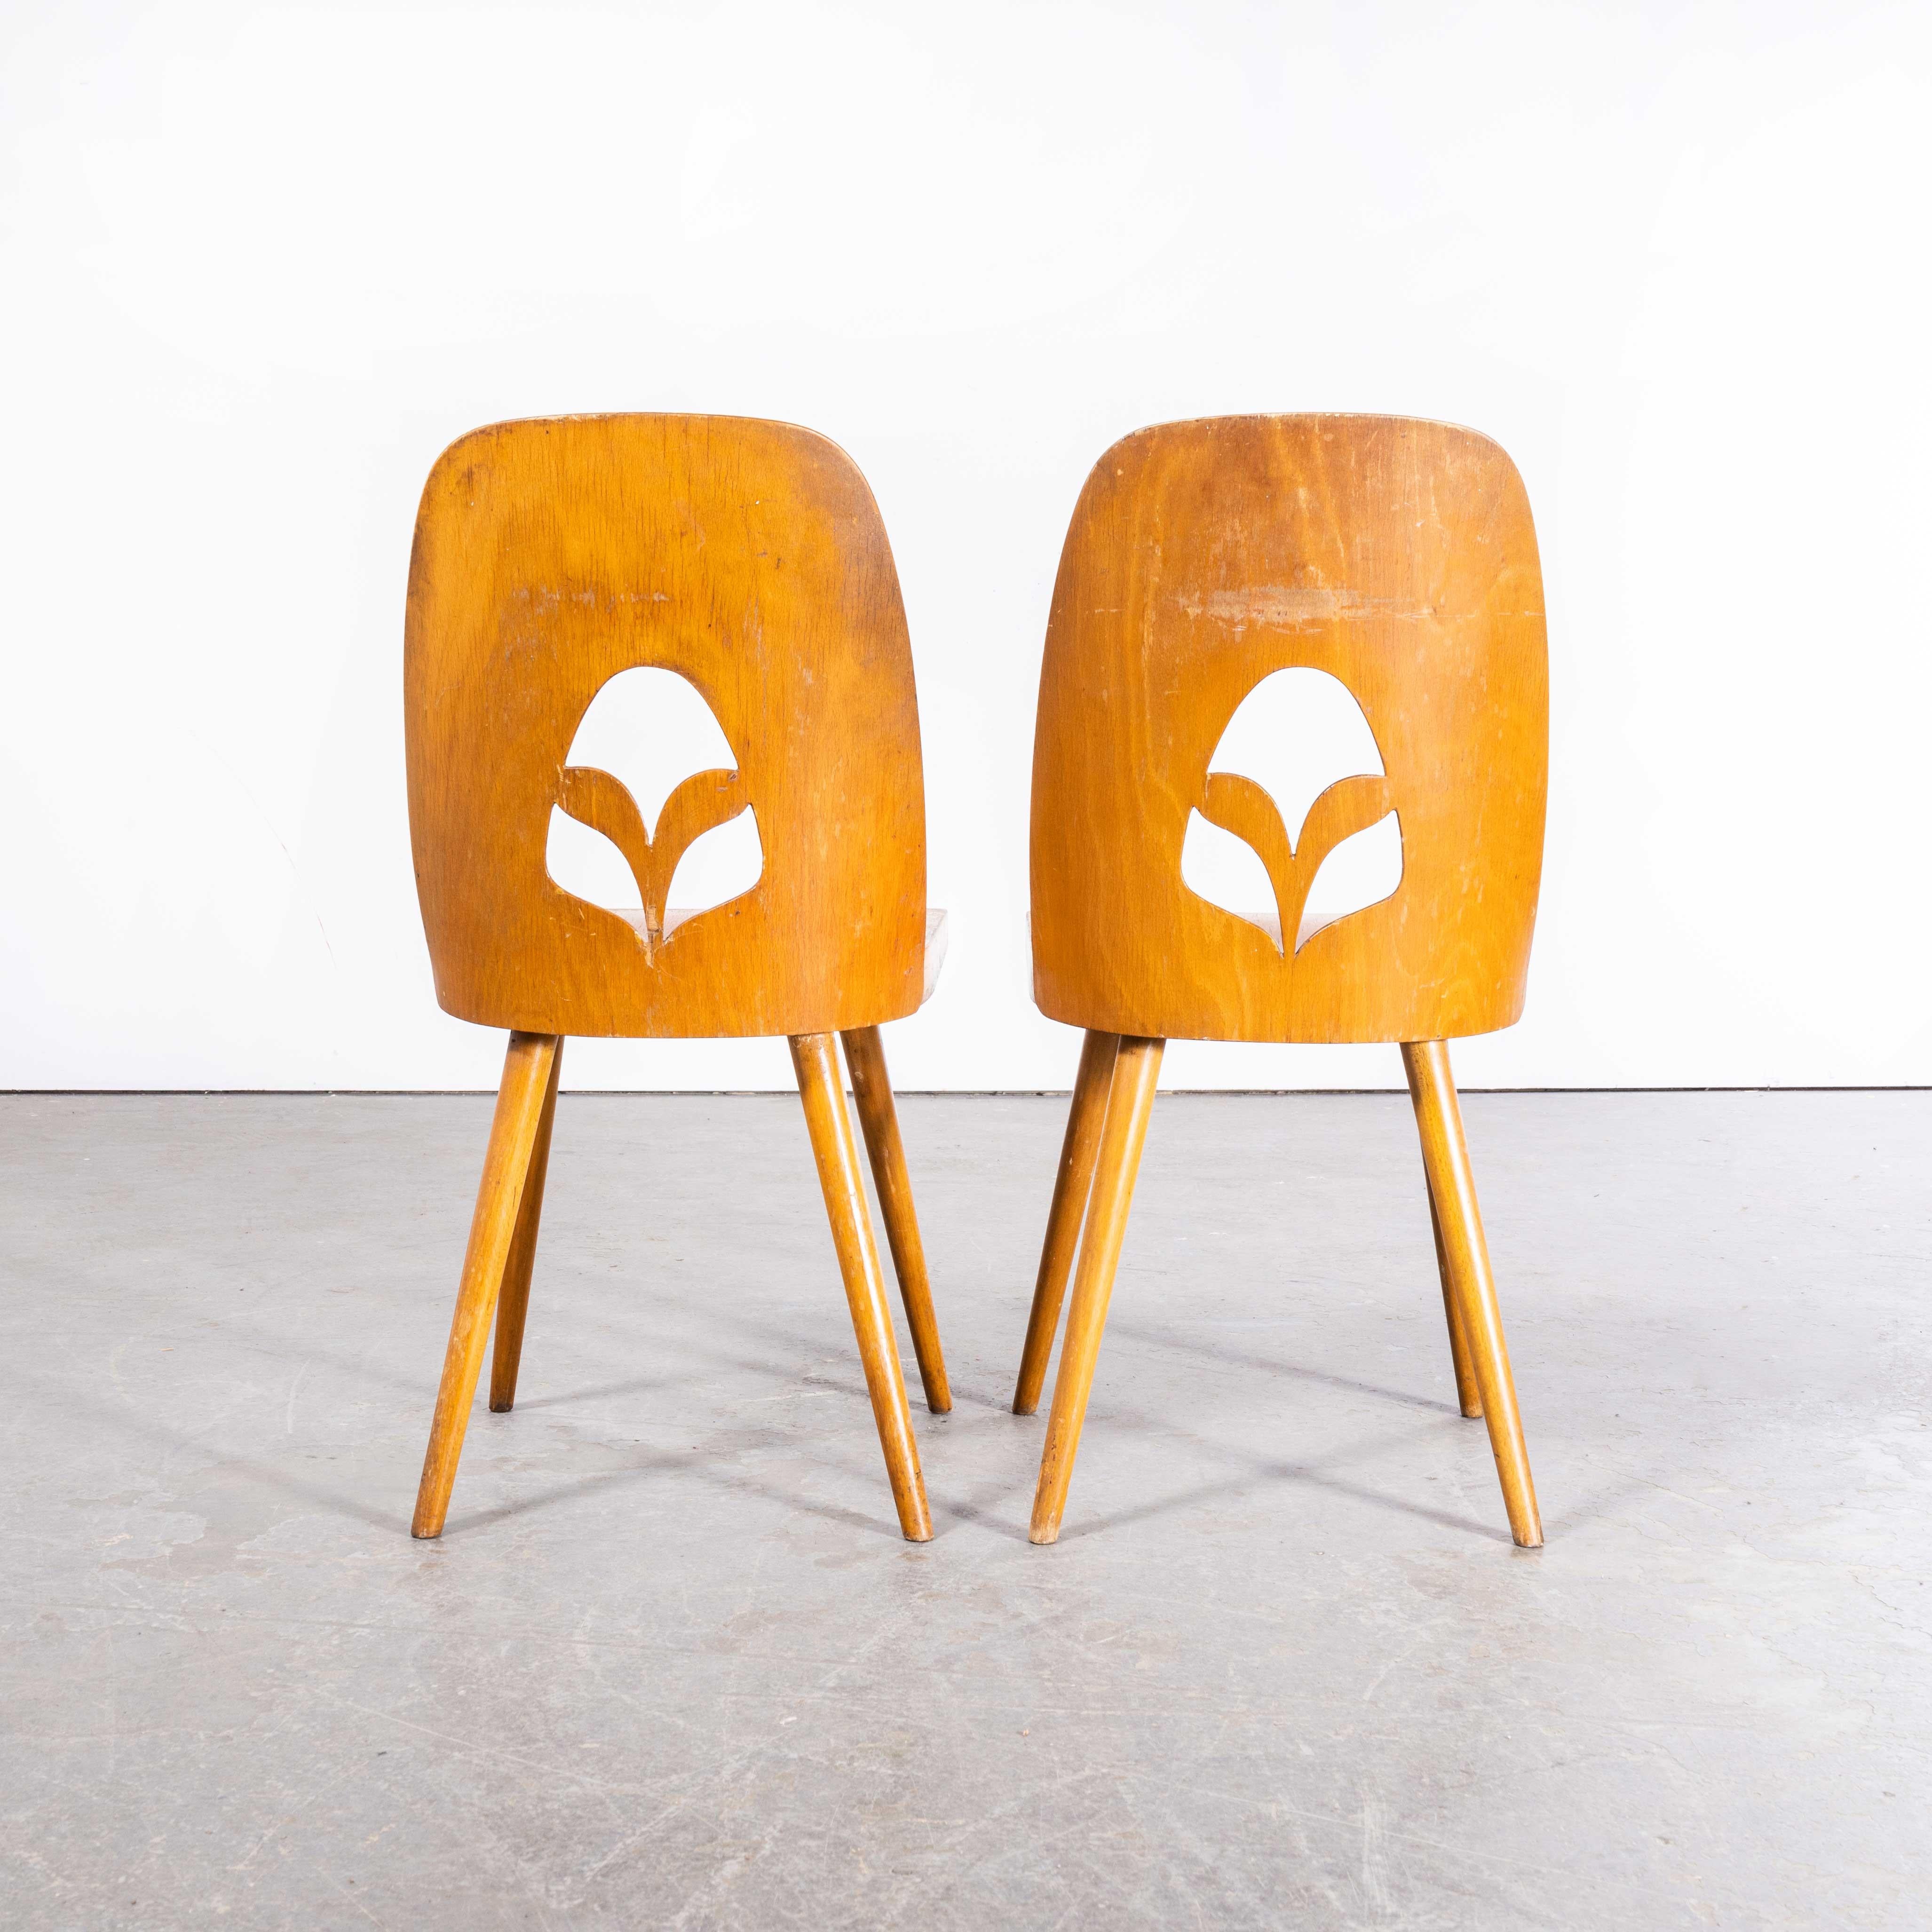 1950s Fretwork Detail Dining Chairs by Radomir Hoffman, Pair For Sale 2